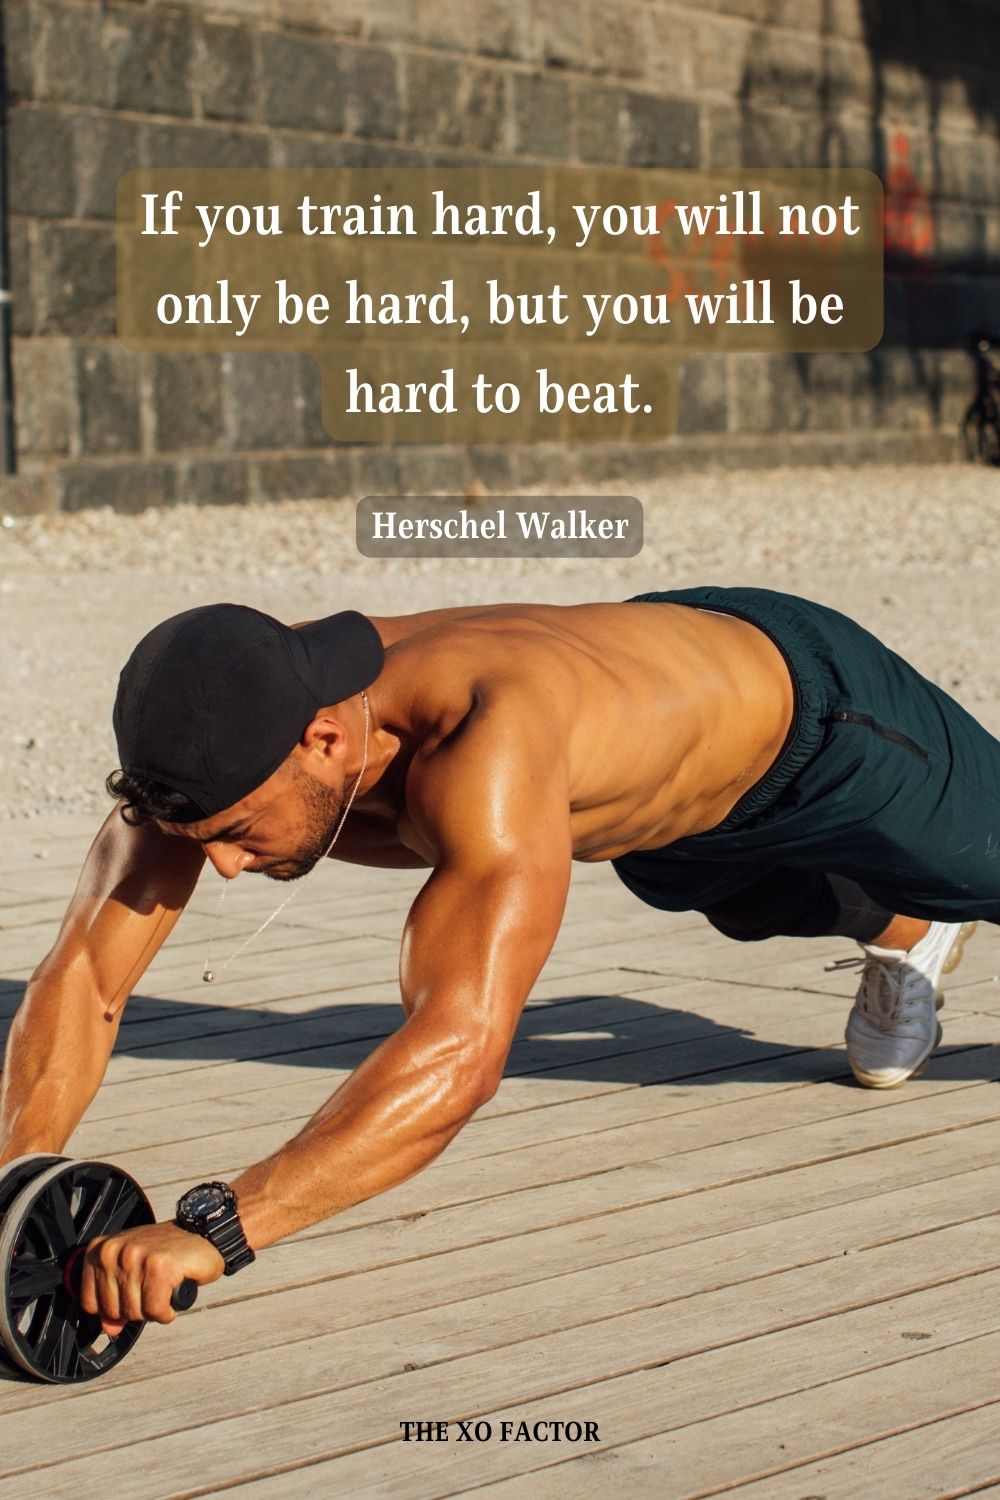 If you train hard, you will not only be hard, but you will be hard to beat. Herschel Walker